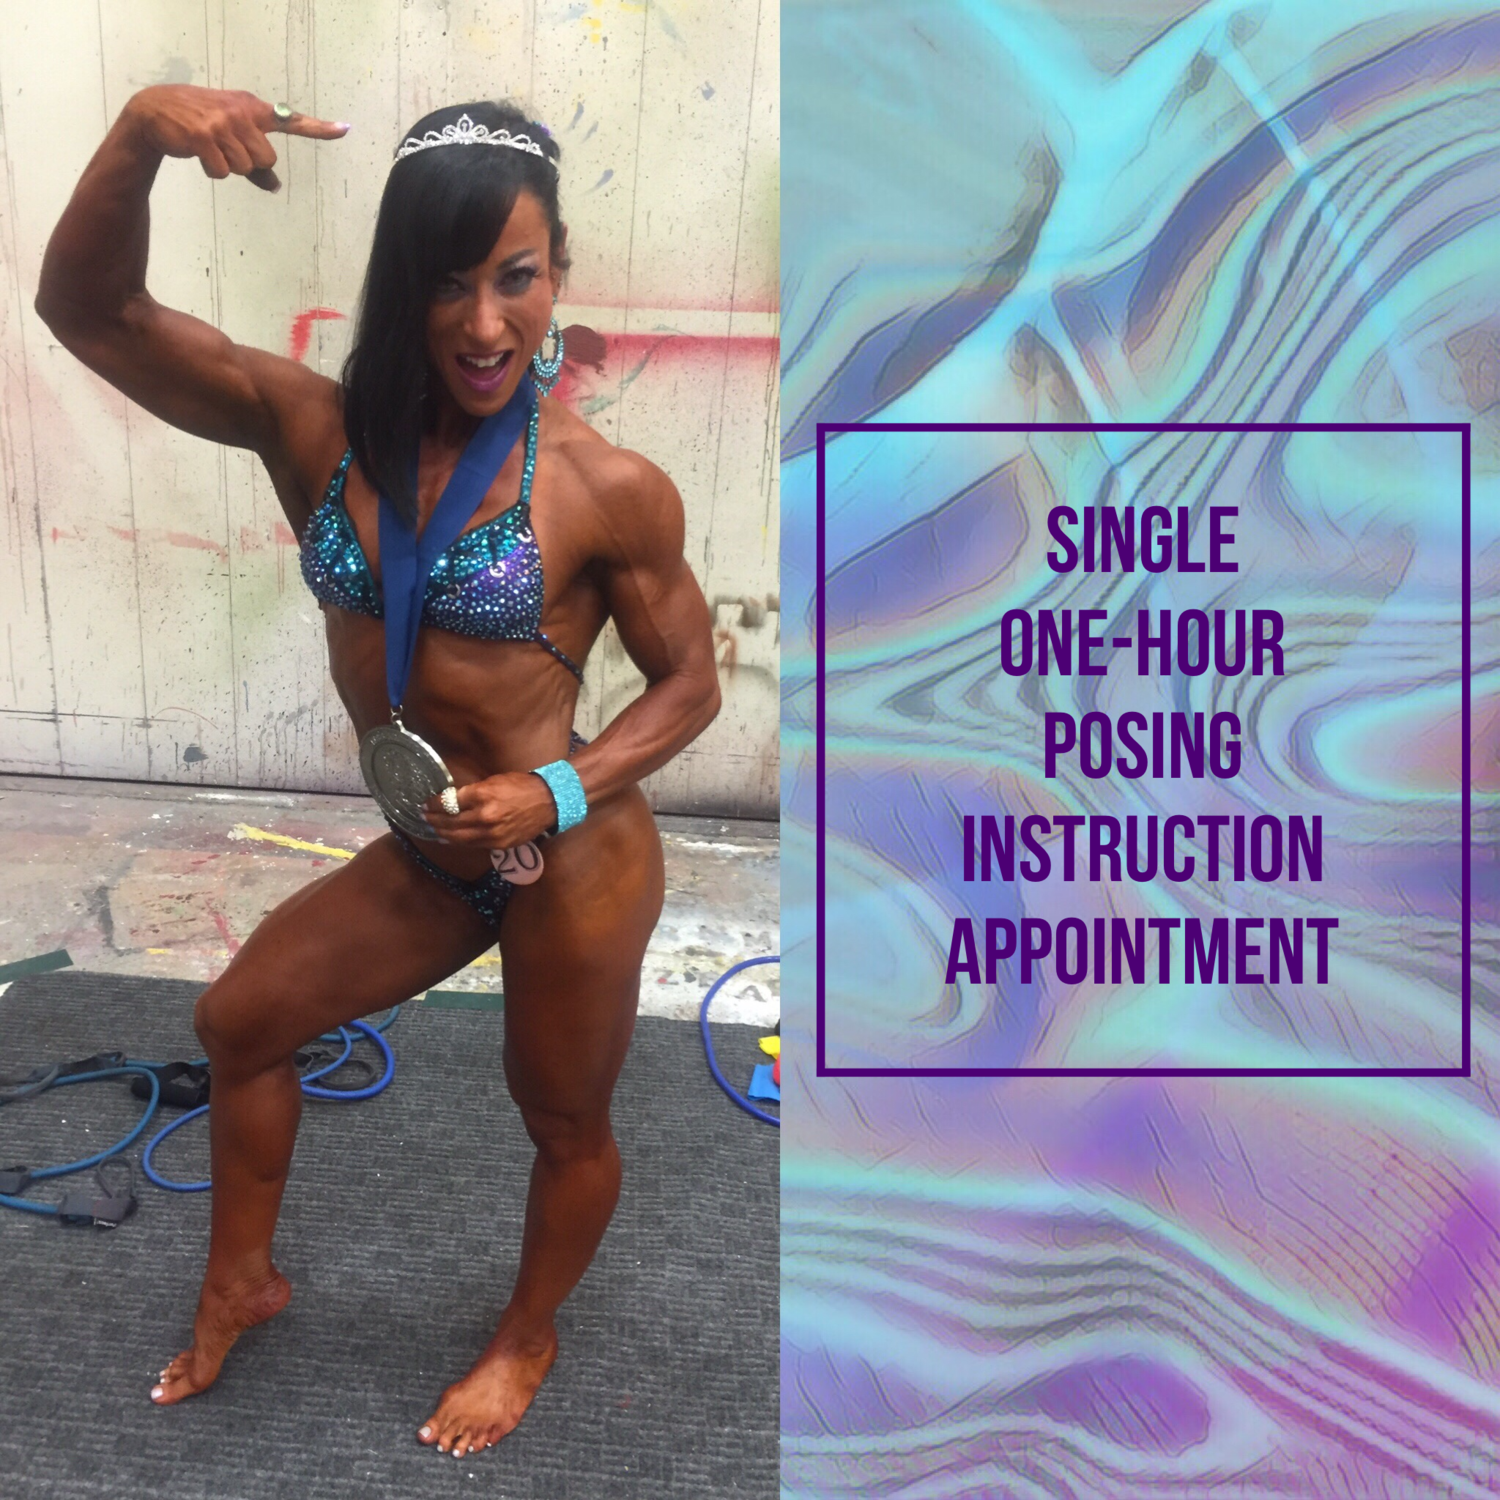 Single 1-Hour Posing Instruction Appointment